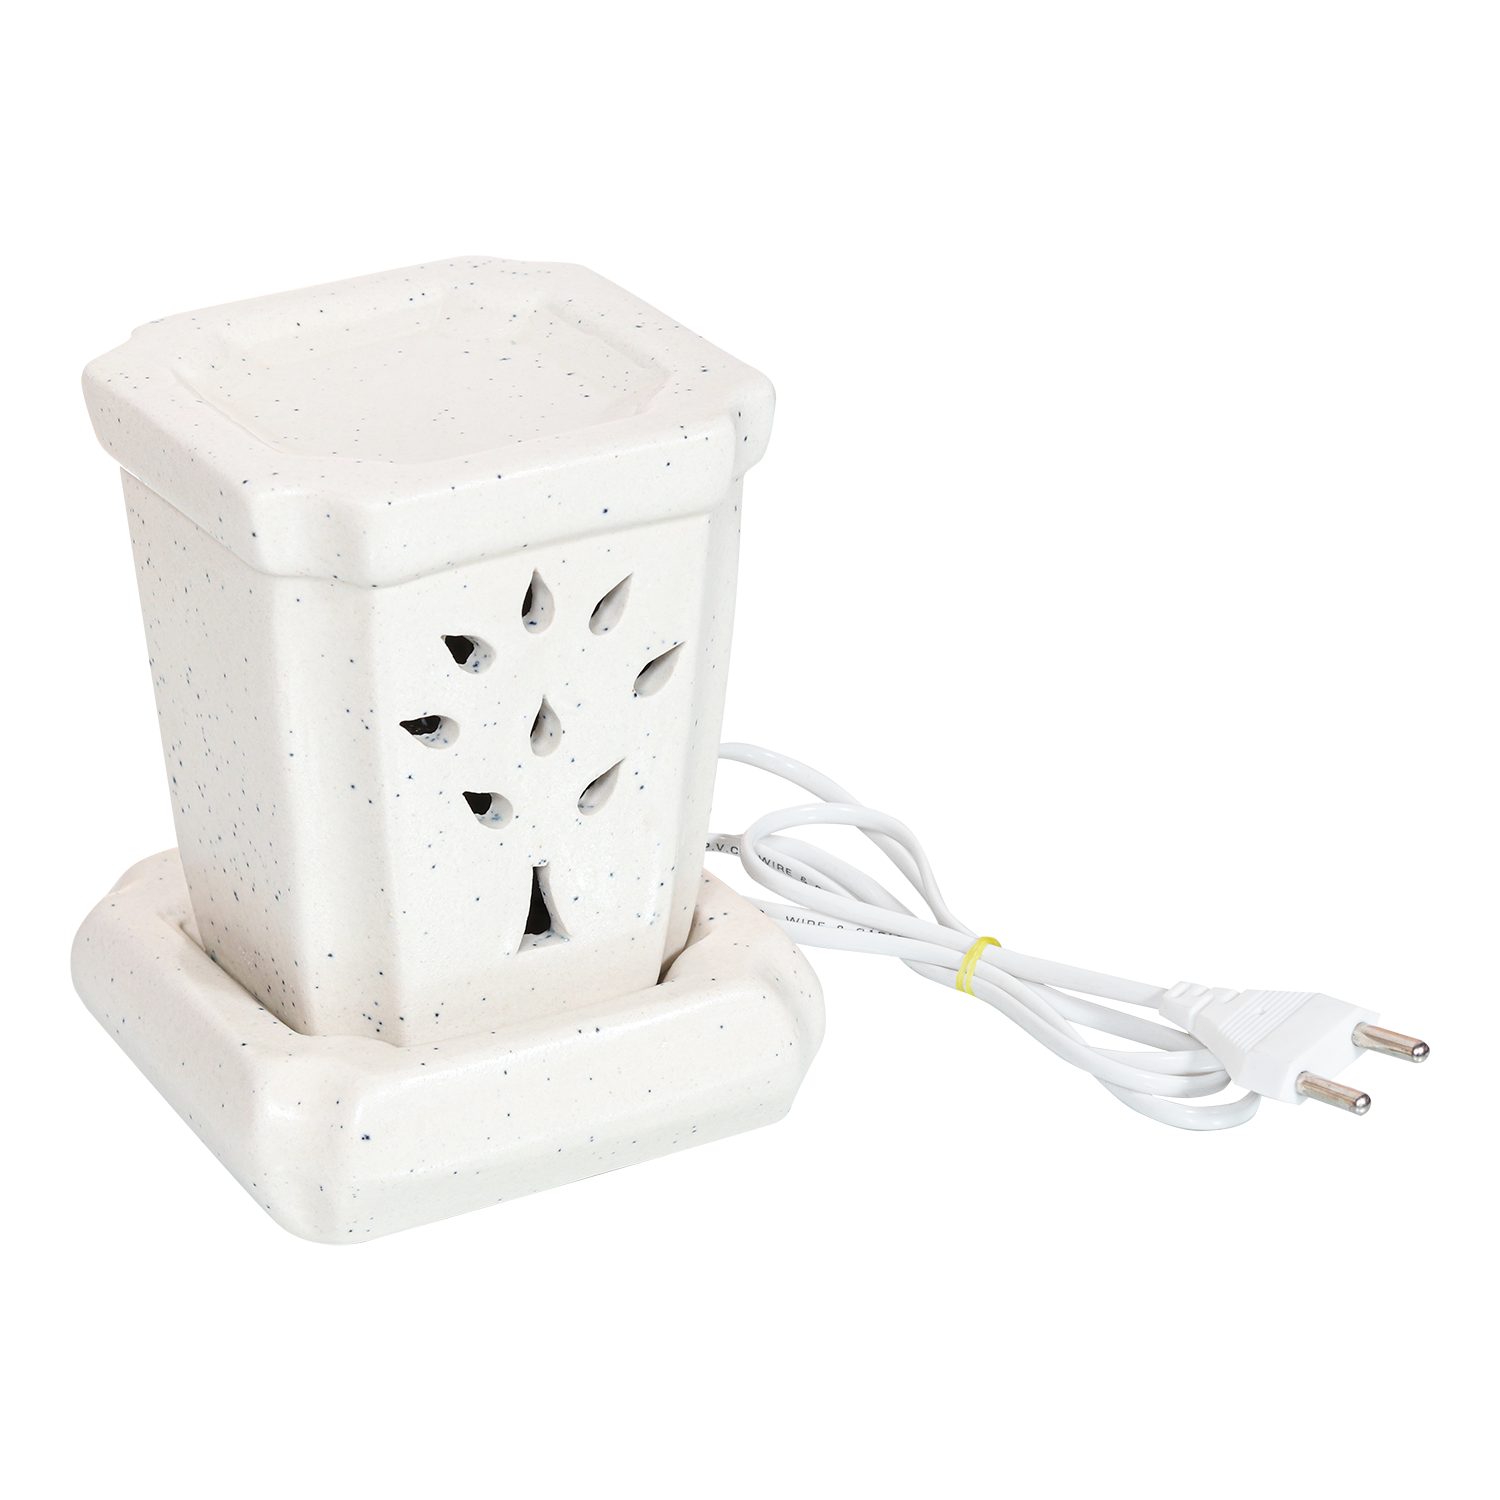 Electric Diffuser with 10ml Lemongrass Essential Oil - White With Black Dots Colour